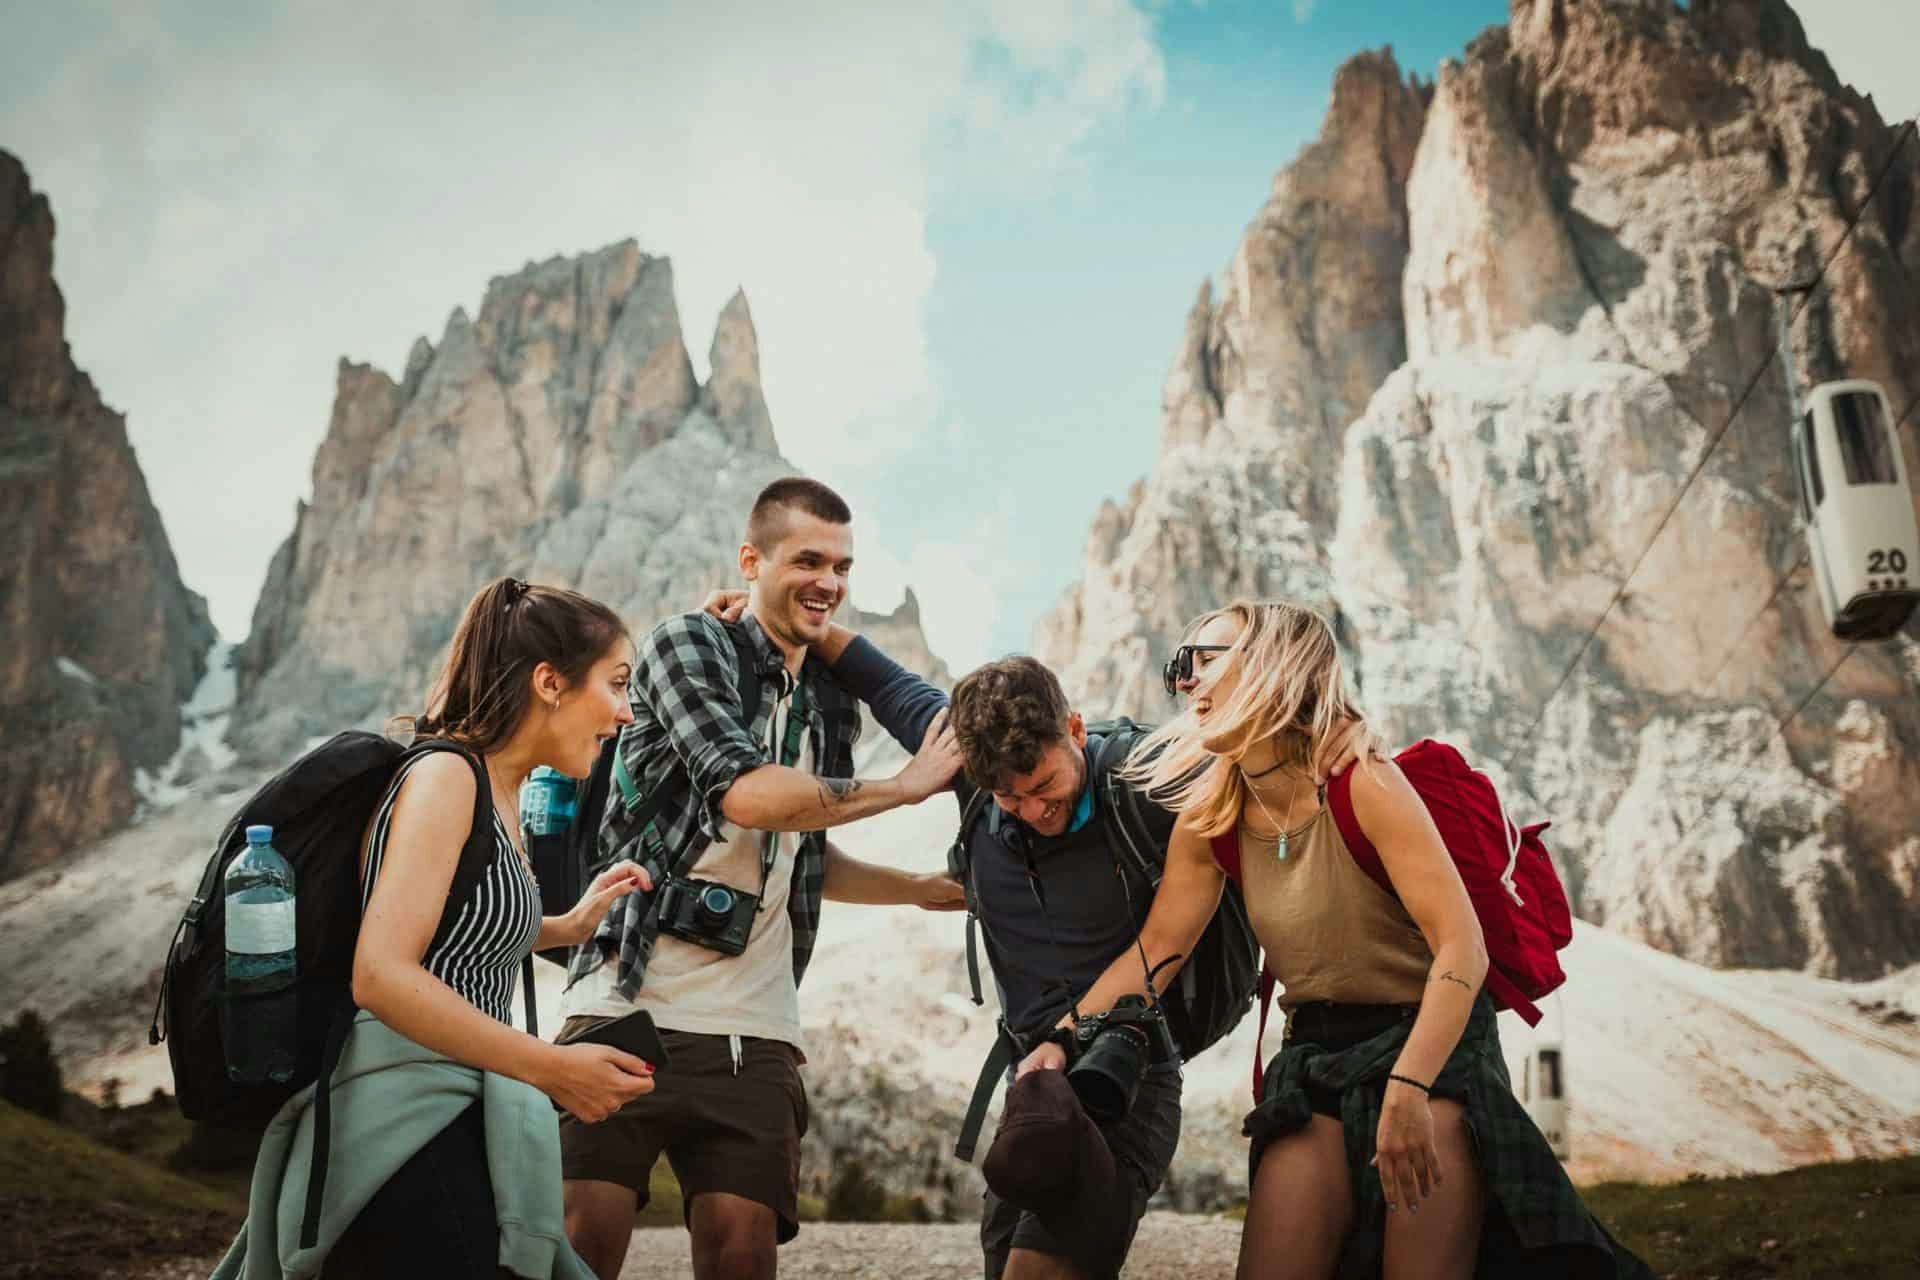 Photo of a group of 2 men and 2 women on a hike together